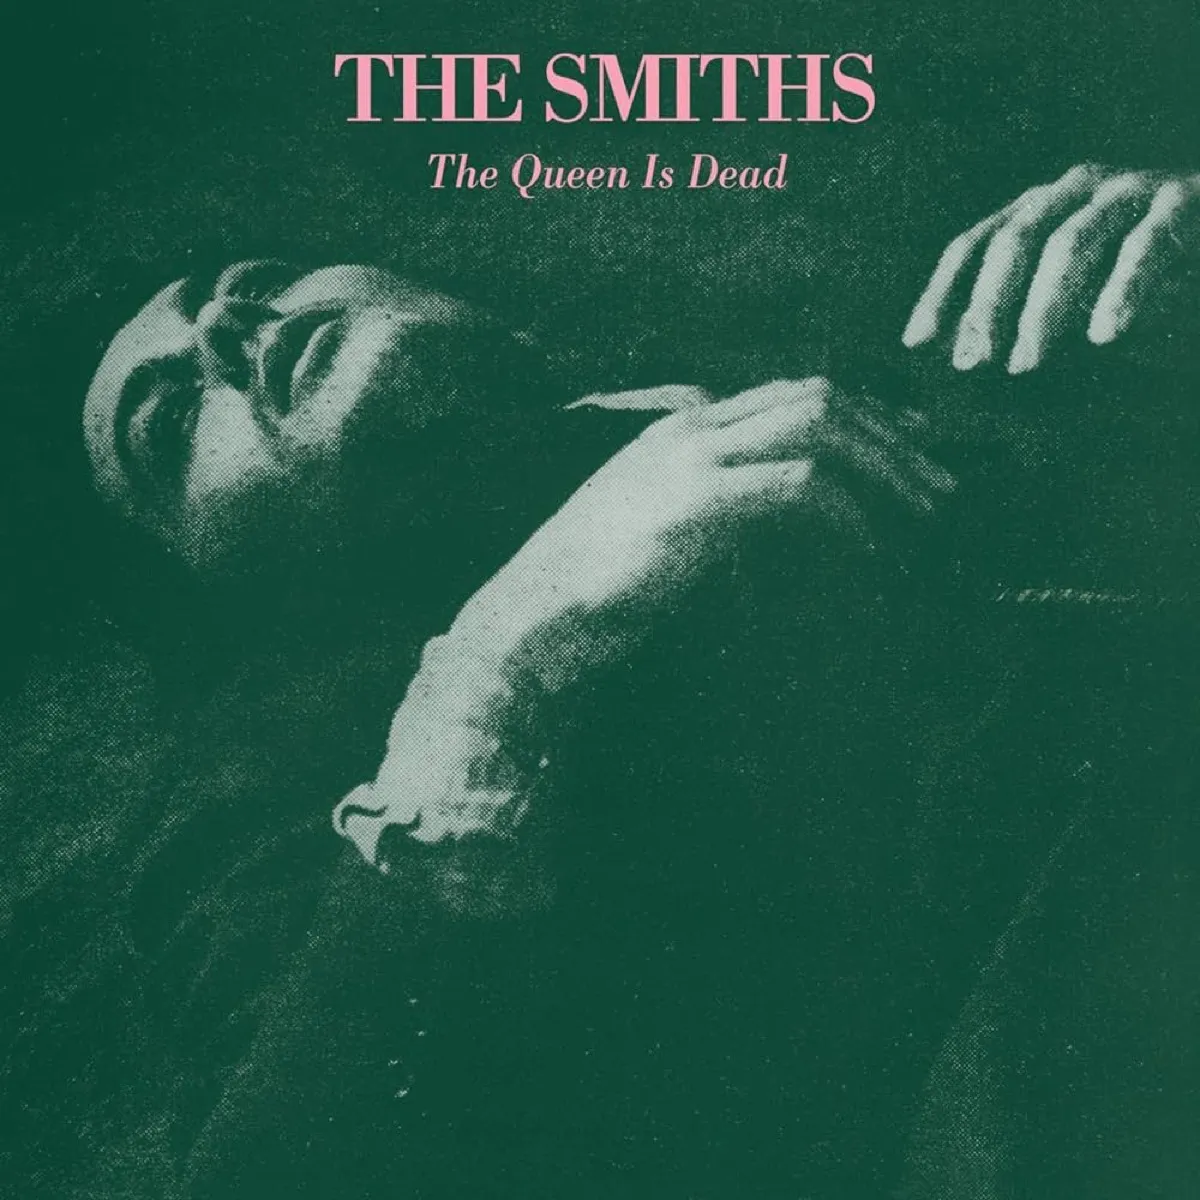 "The Queen Is Dead" by The Smiths album cover